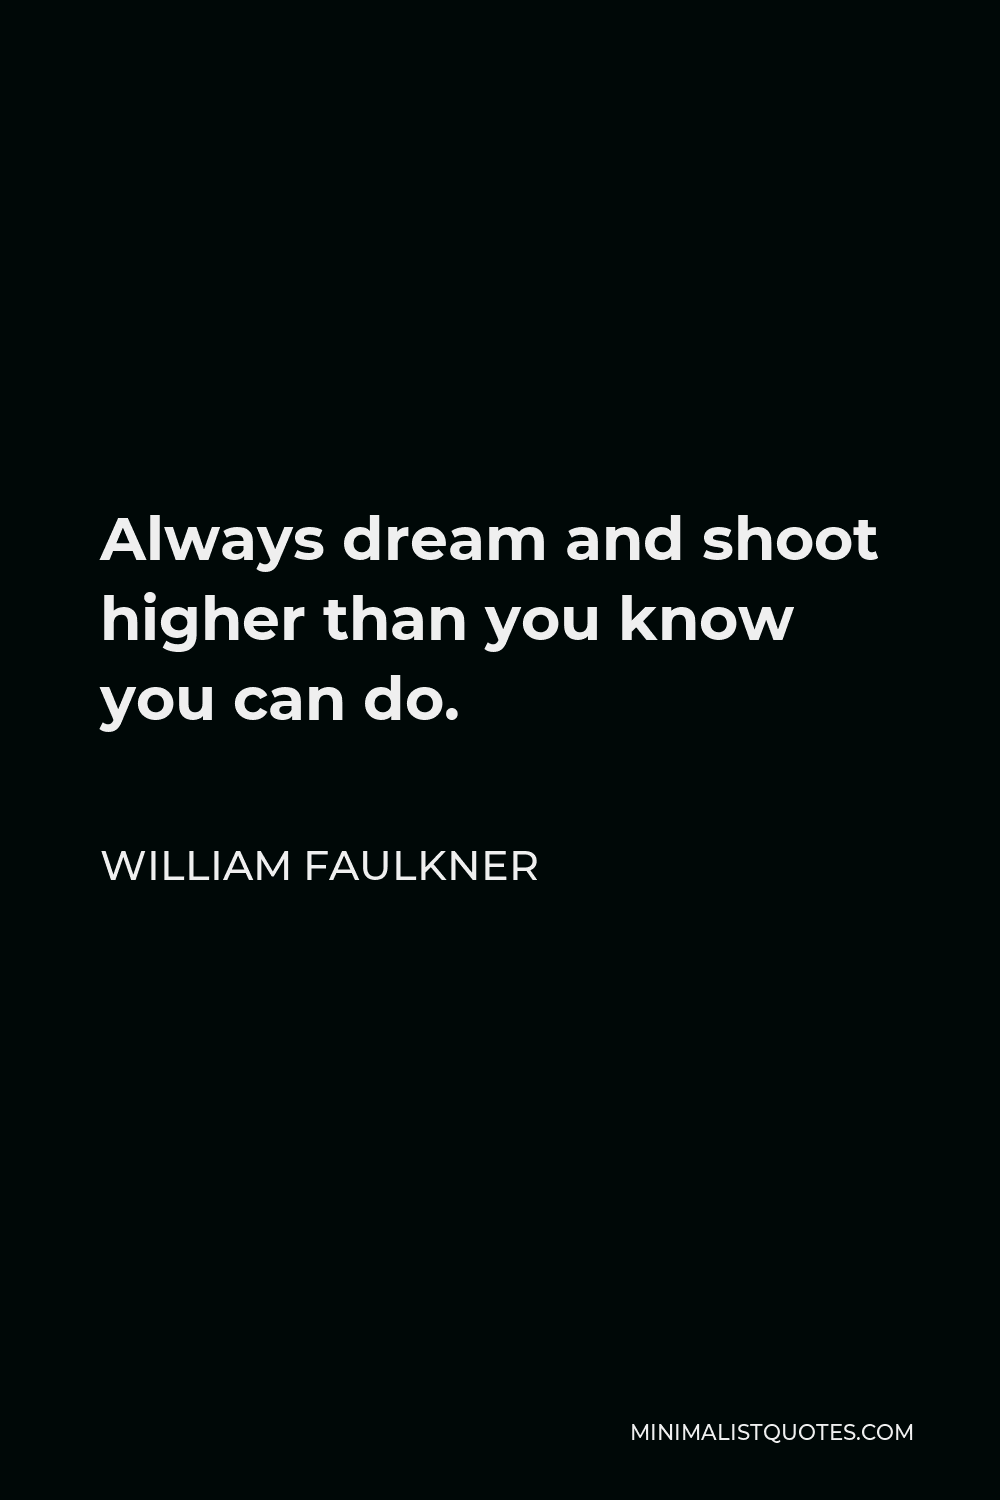 William Faulkner Quote - Always dream and shoot higher than you know you can do.